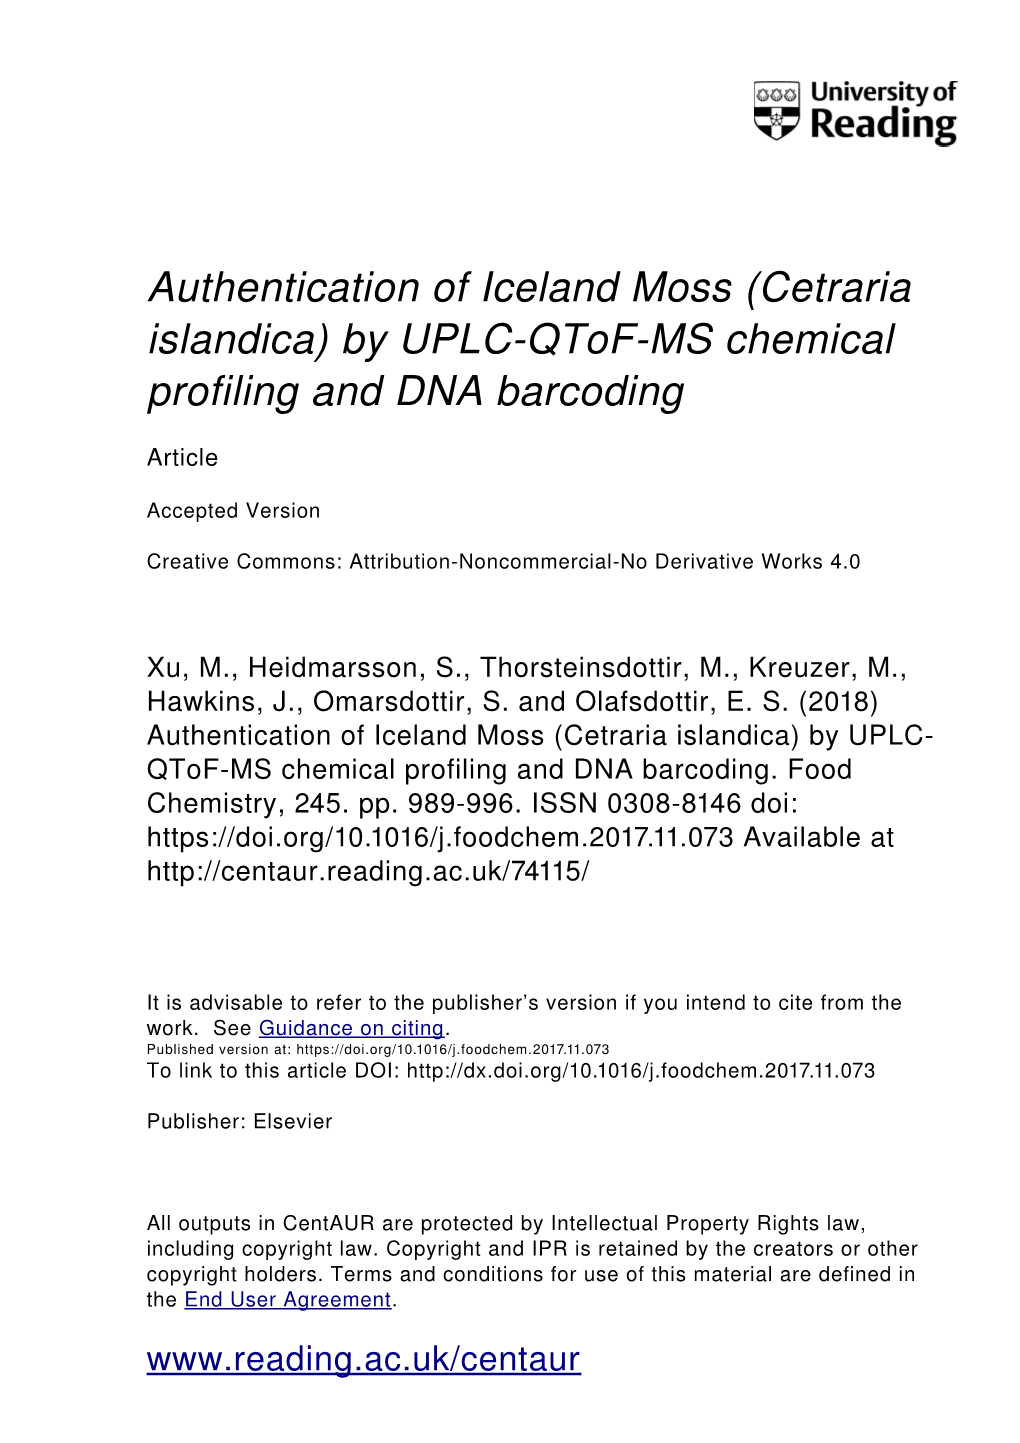 Cetraria Islandica) by UPLC­Qtof­MS Chemical Profiling and DNA Barcoding